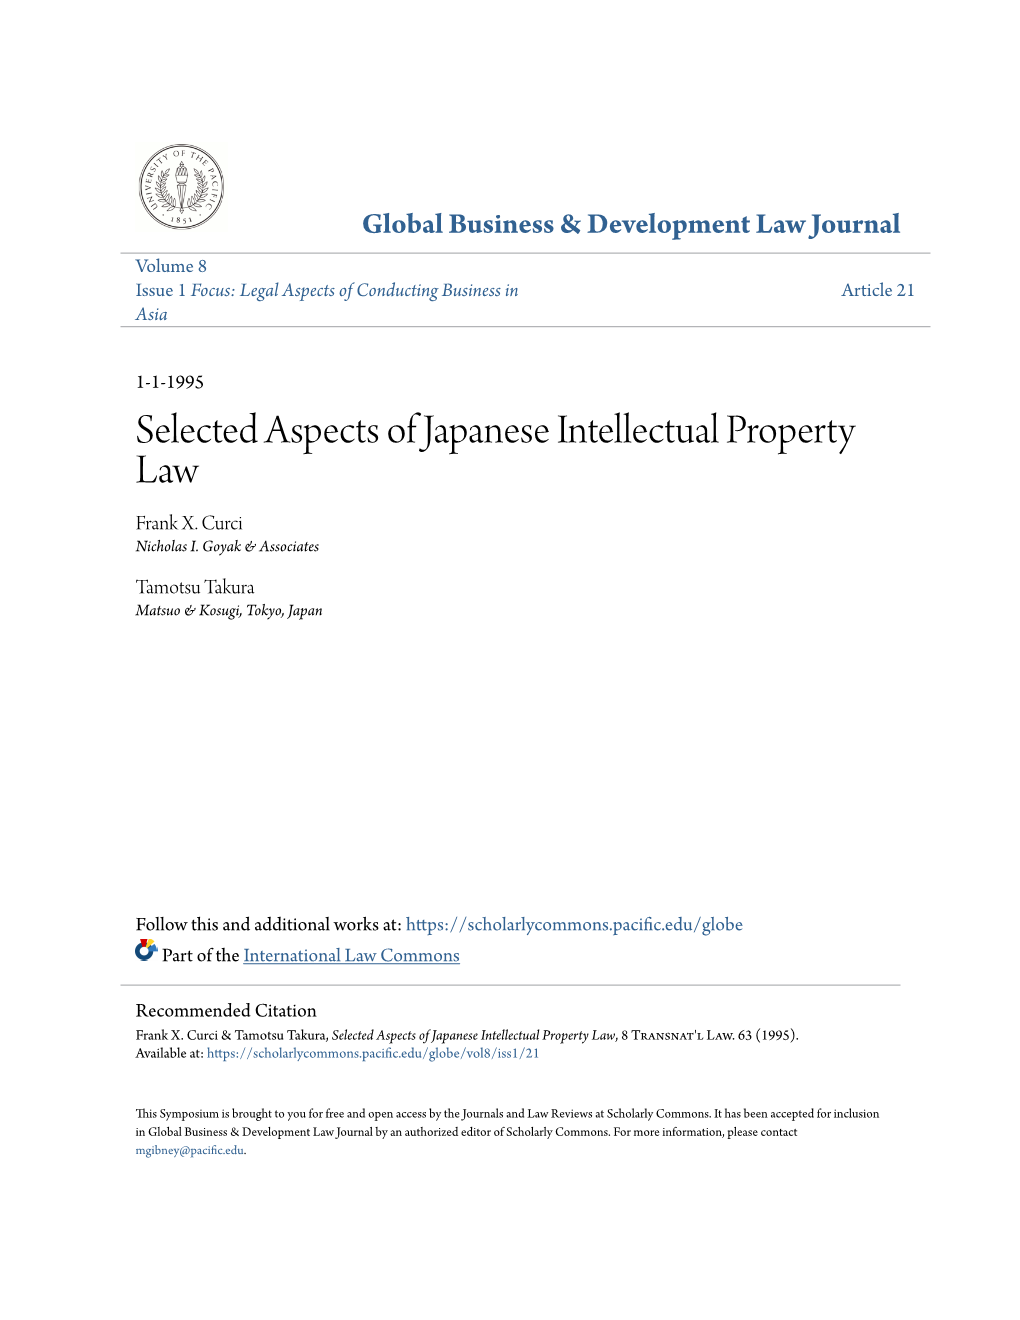 Selected Aspects of Japanese Intellectual Property Law Frank X